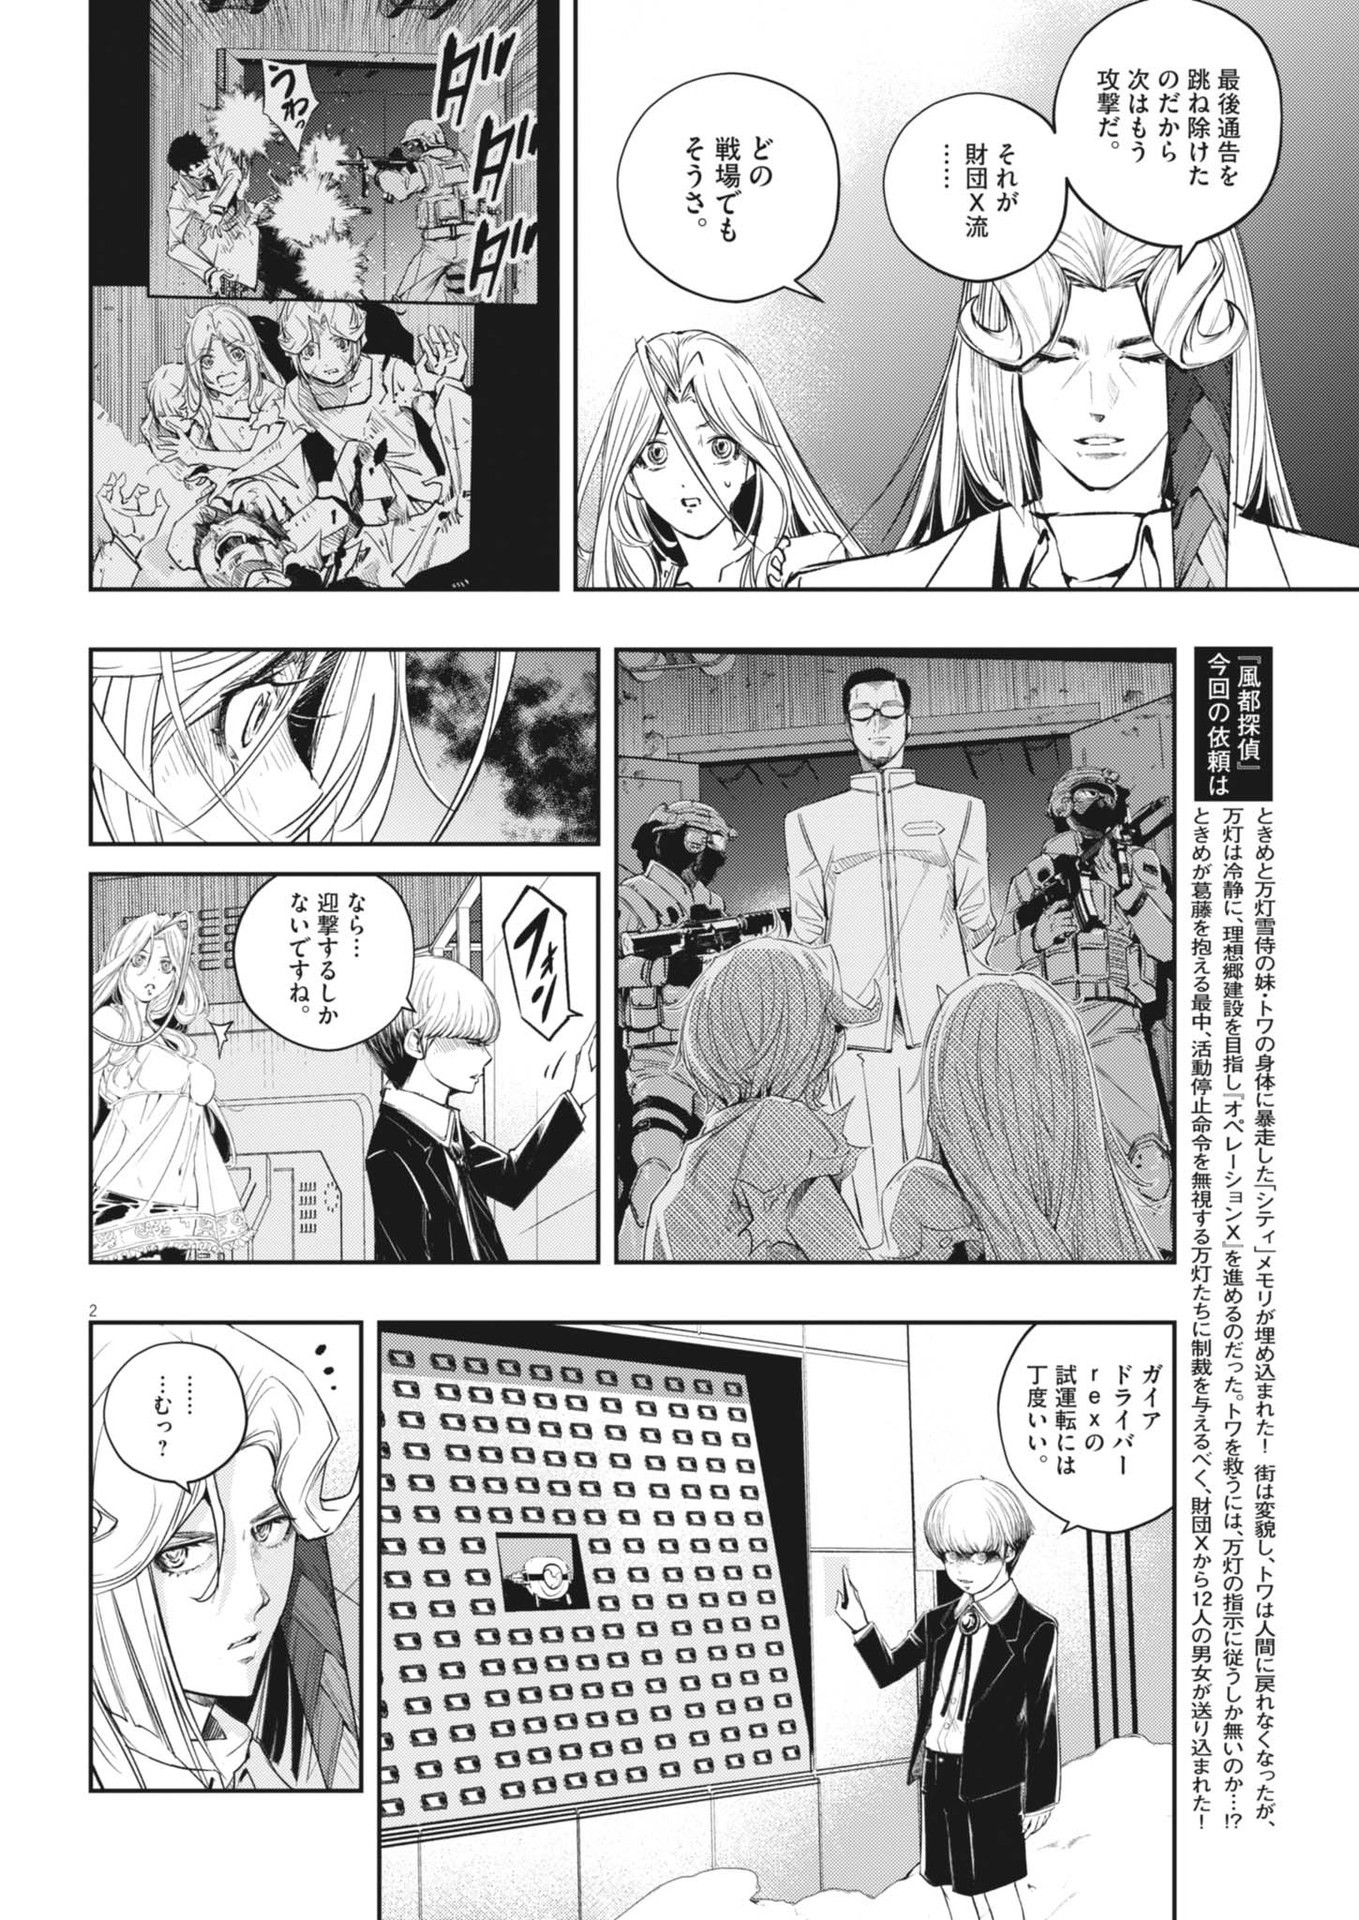 Kamen Rider W: Fuuto Tantei - Chapter 148 - Page 3